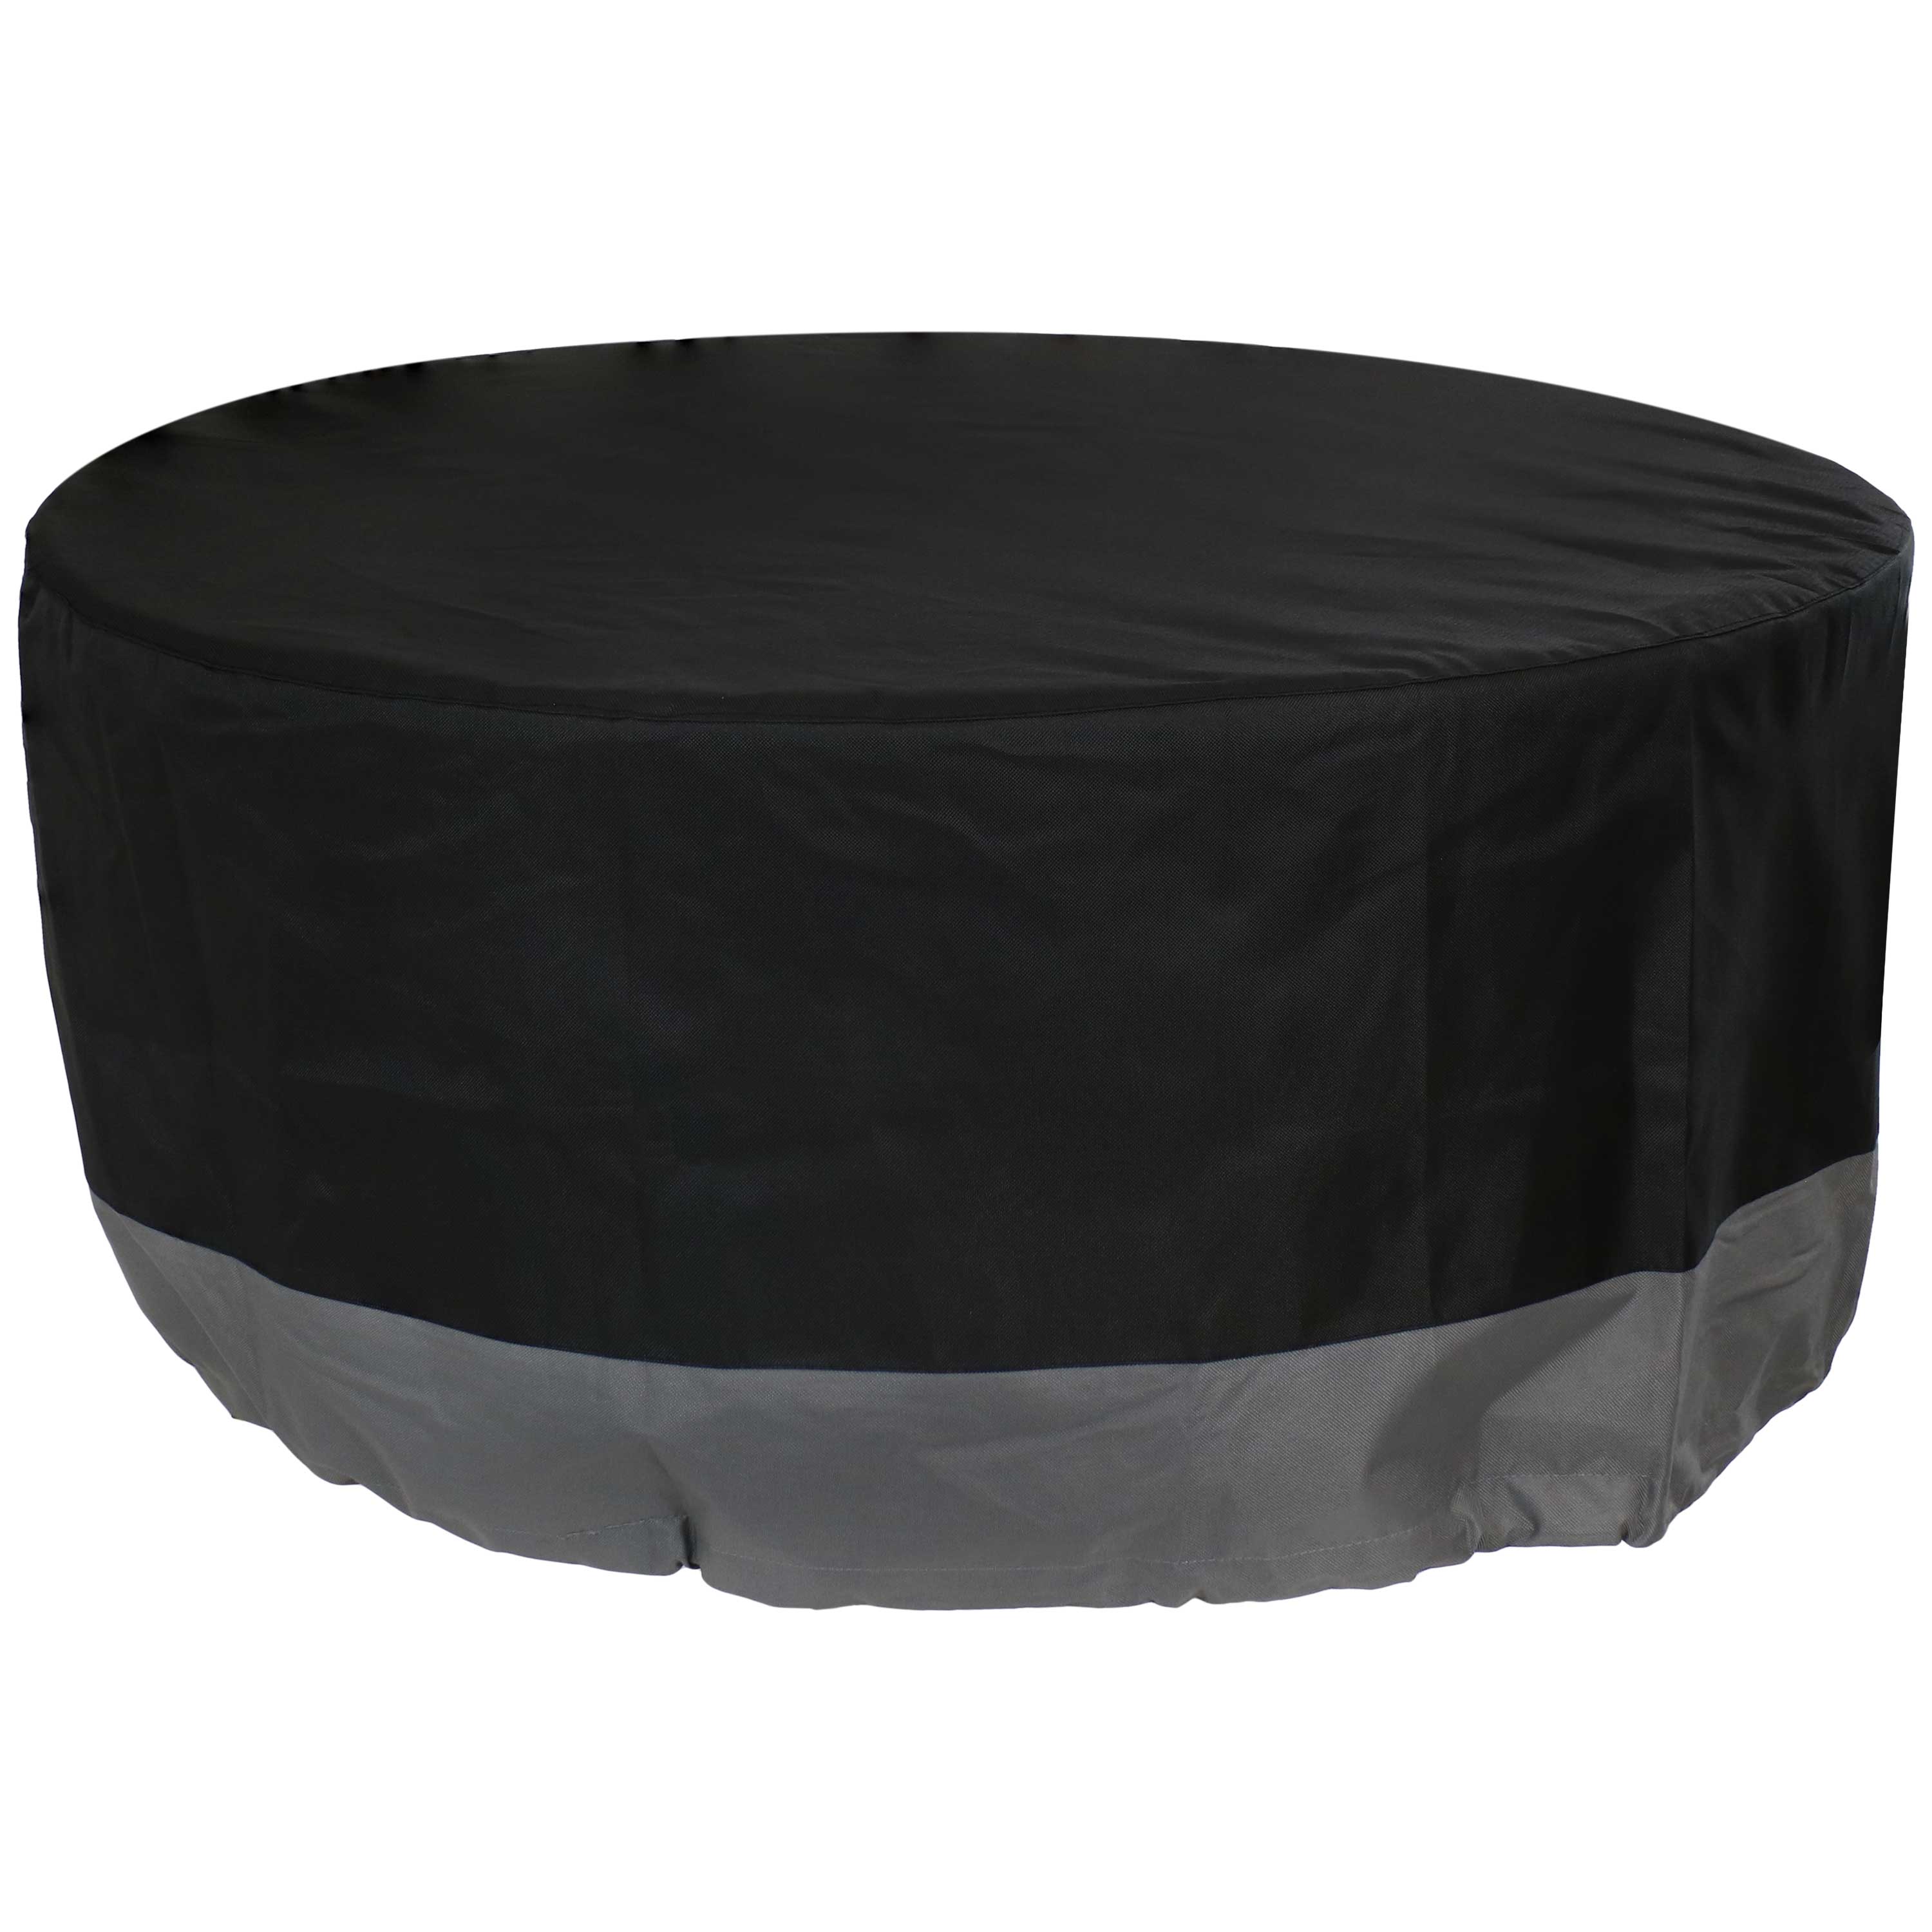 Sunnydaze Round 2-Tone Outdoor Fire Pit Cover - Gray/Black - 40-Inch